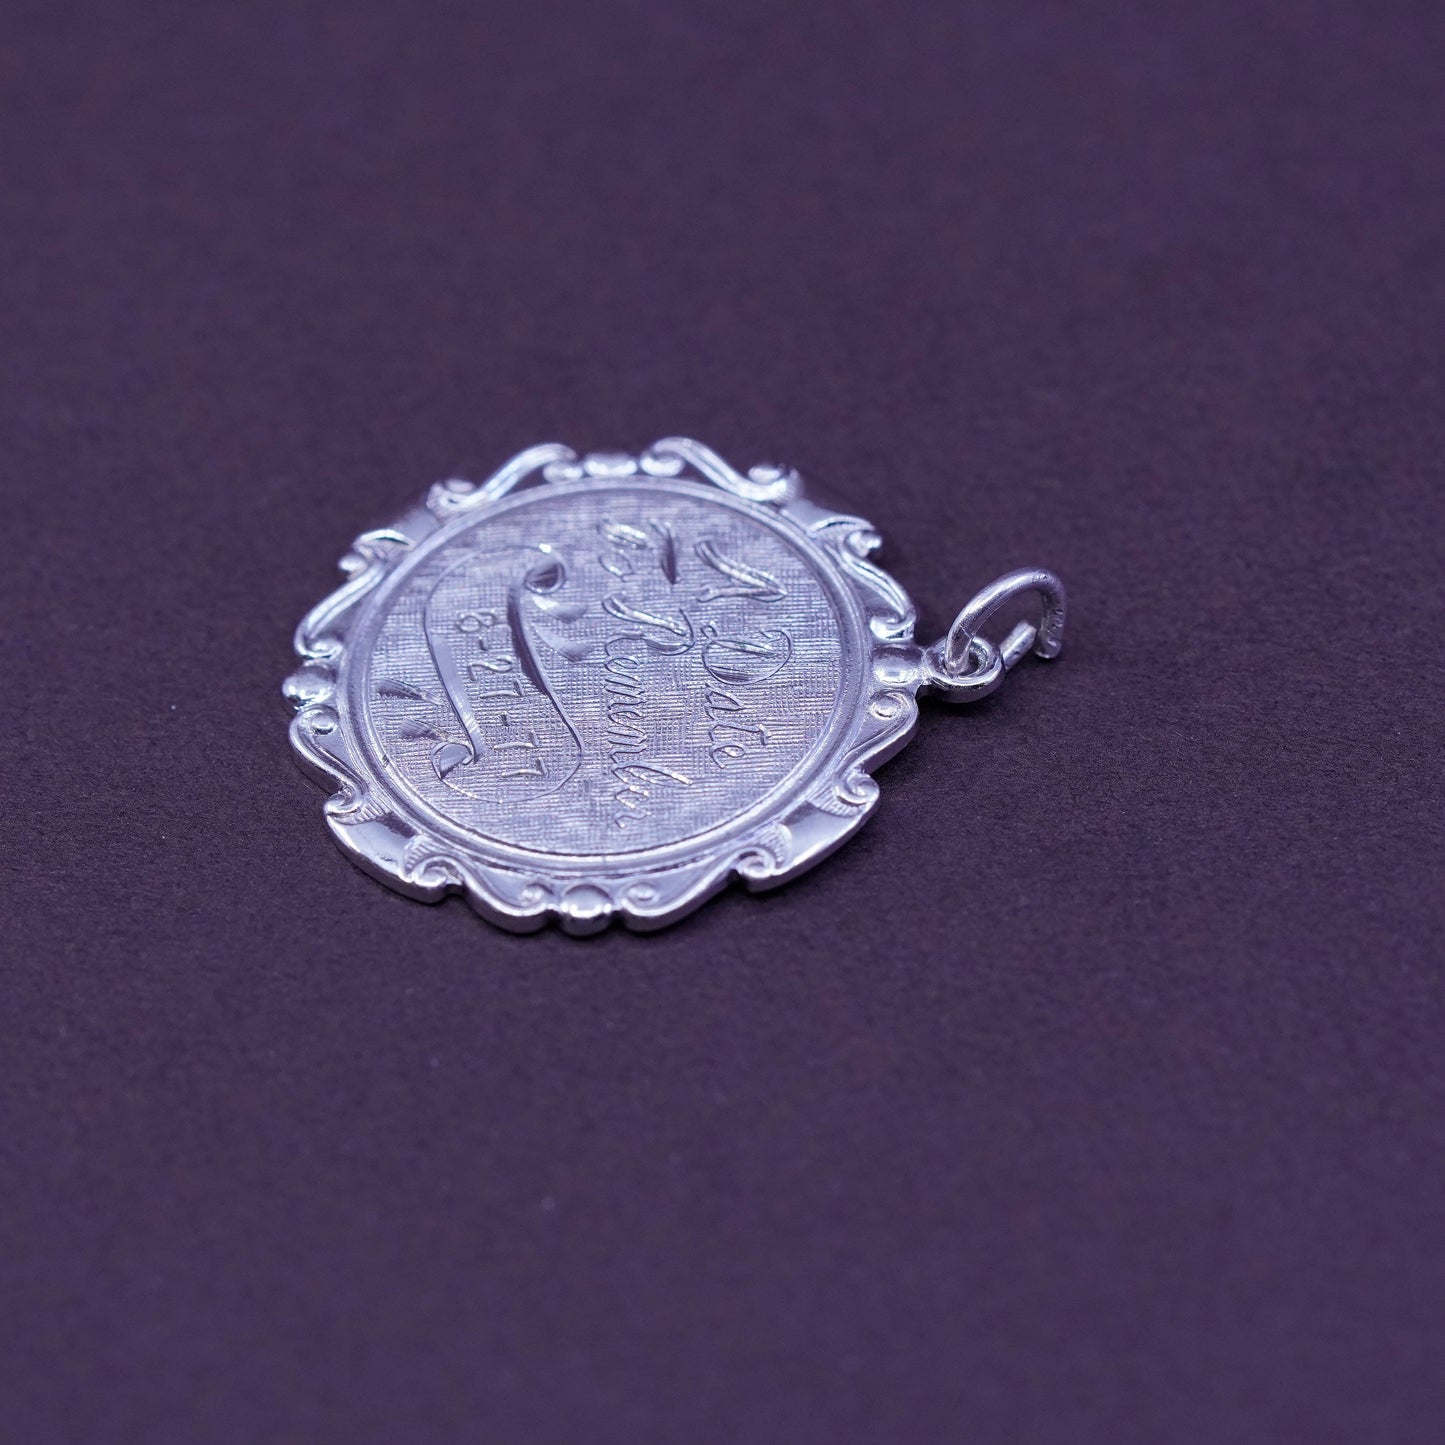 Vintage Sterling silver handmade charm, 925 pendant engraved “a day to remember